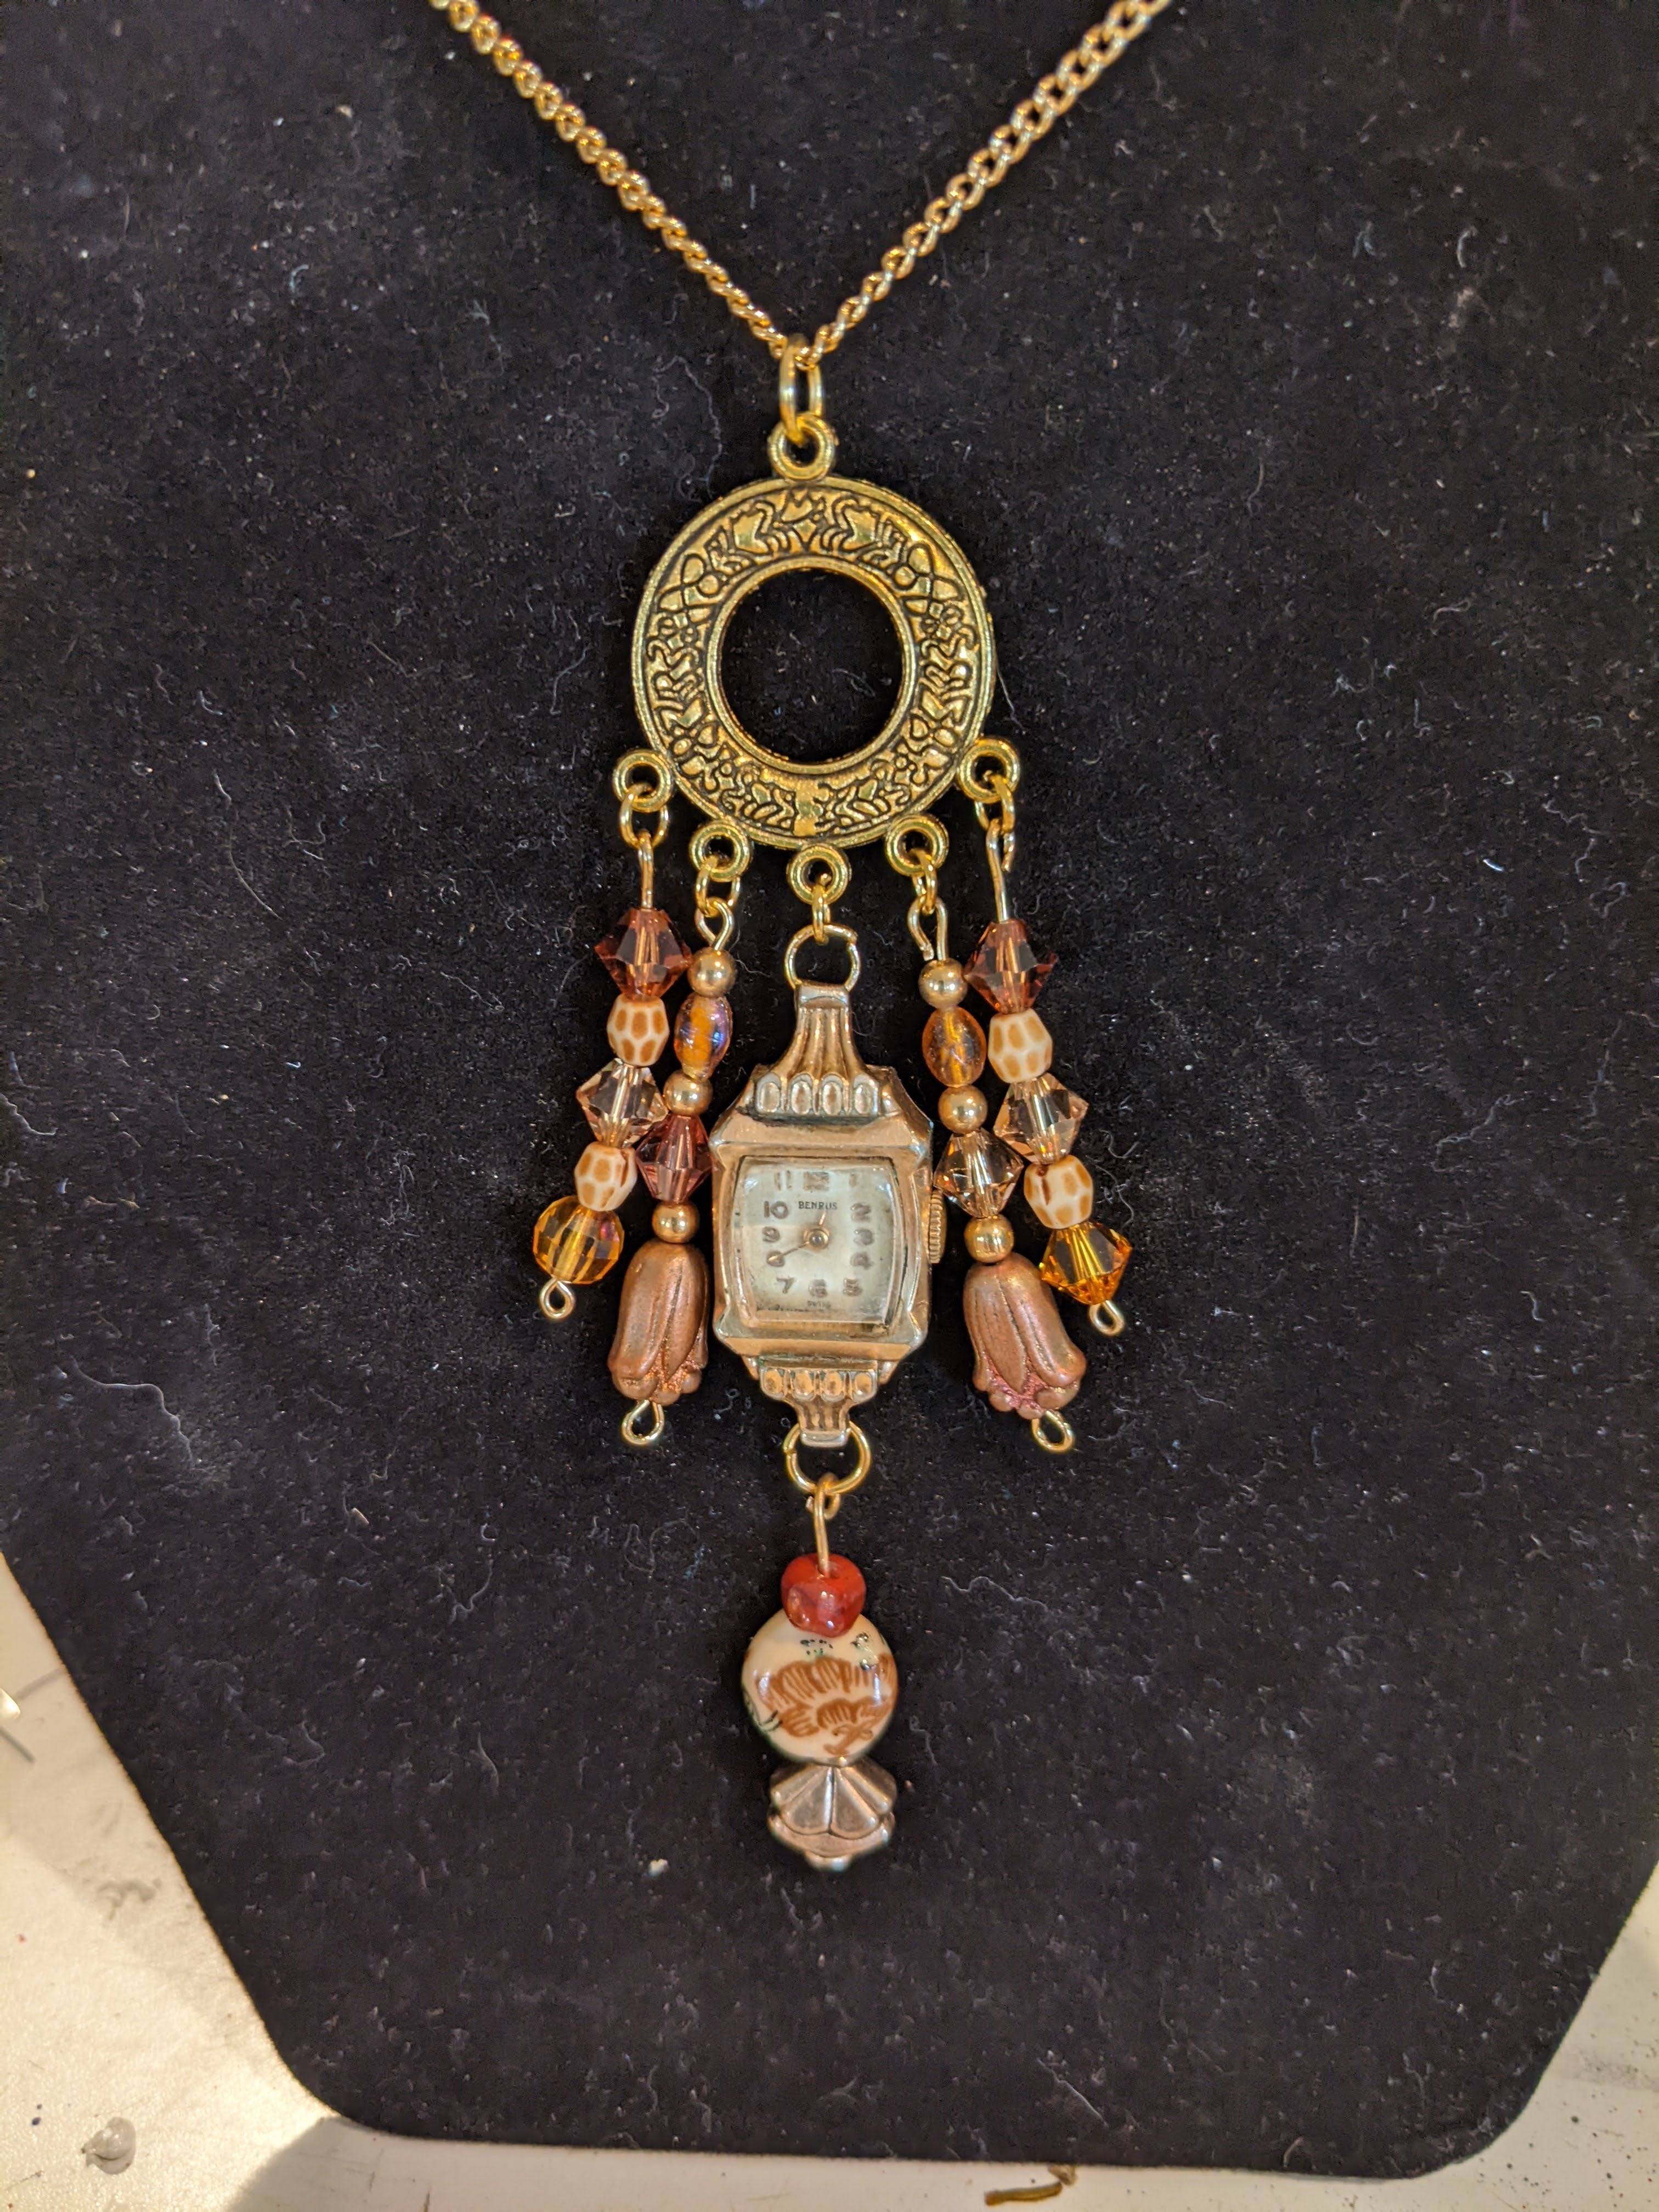 Amber and gold vintage watch necklace